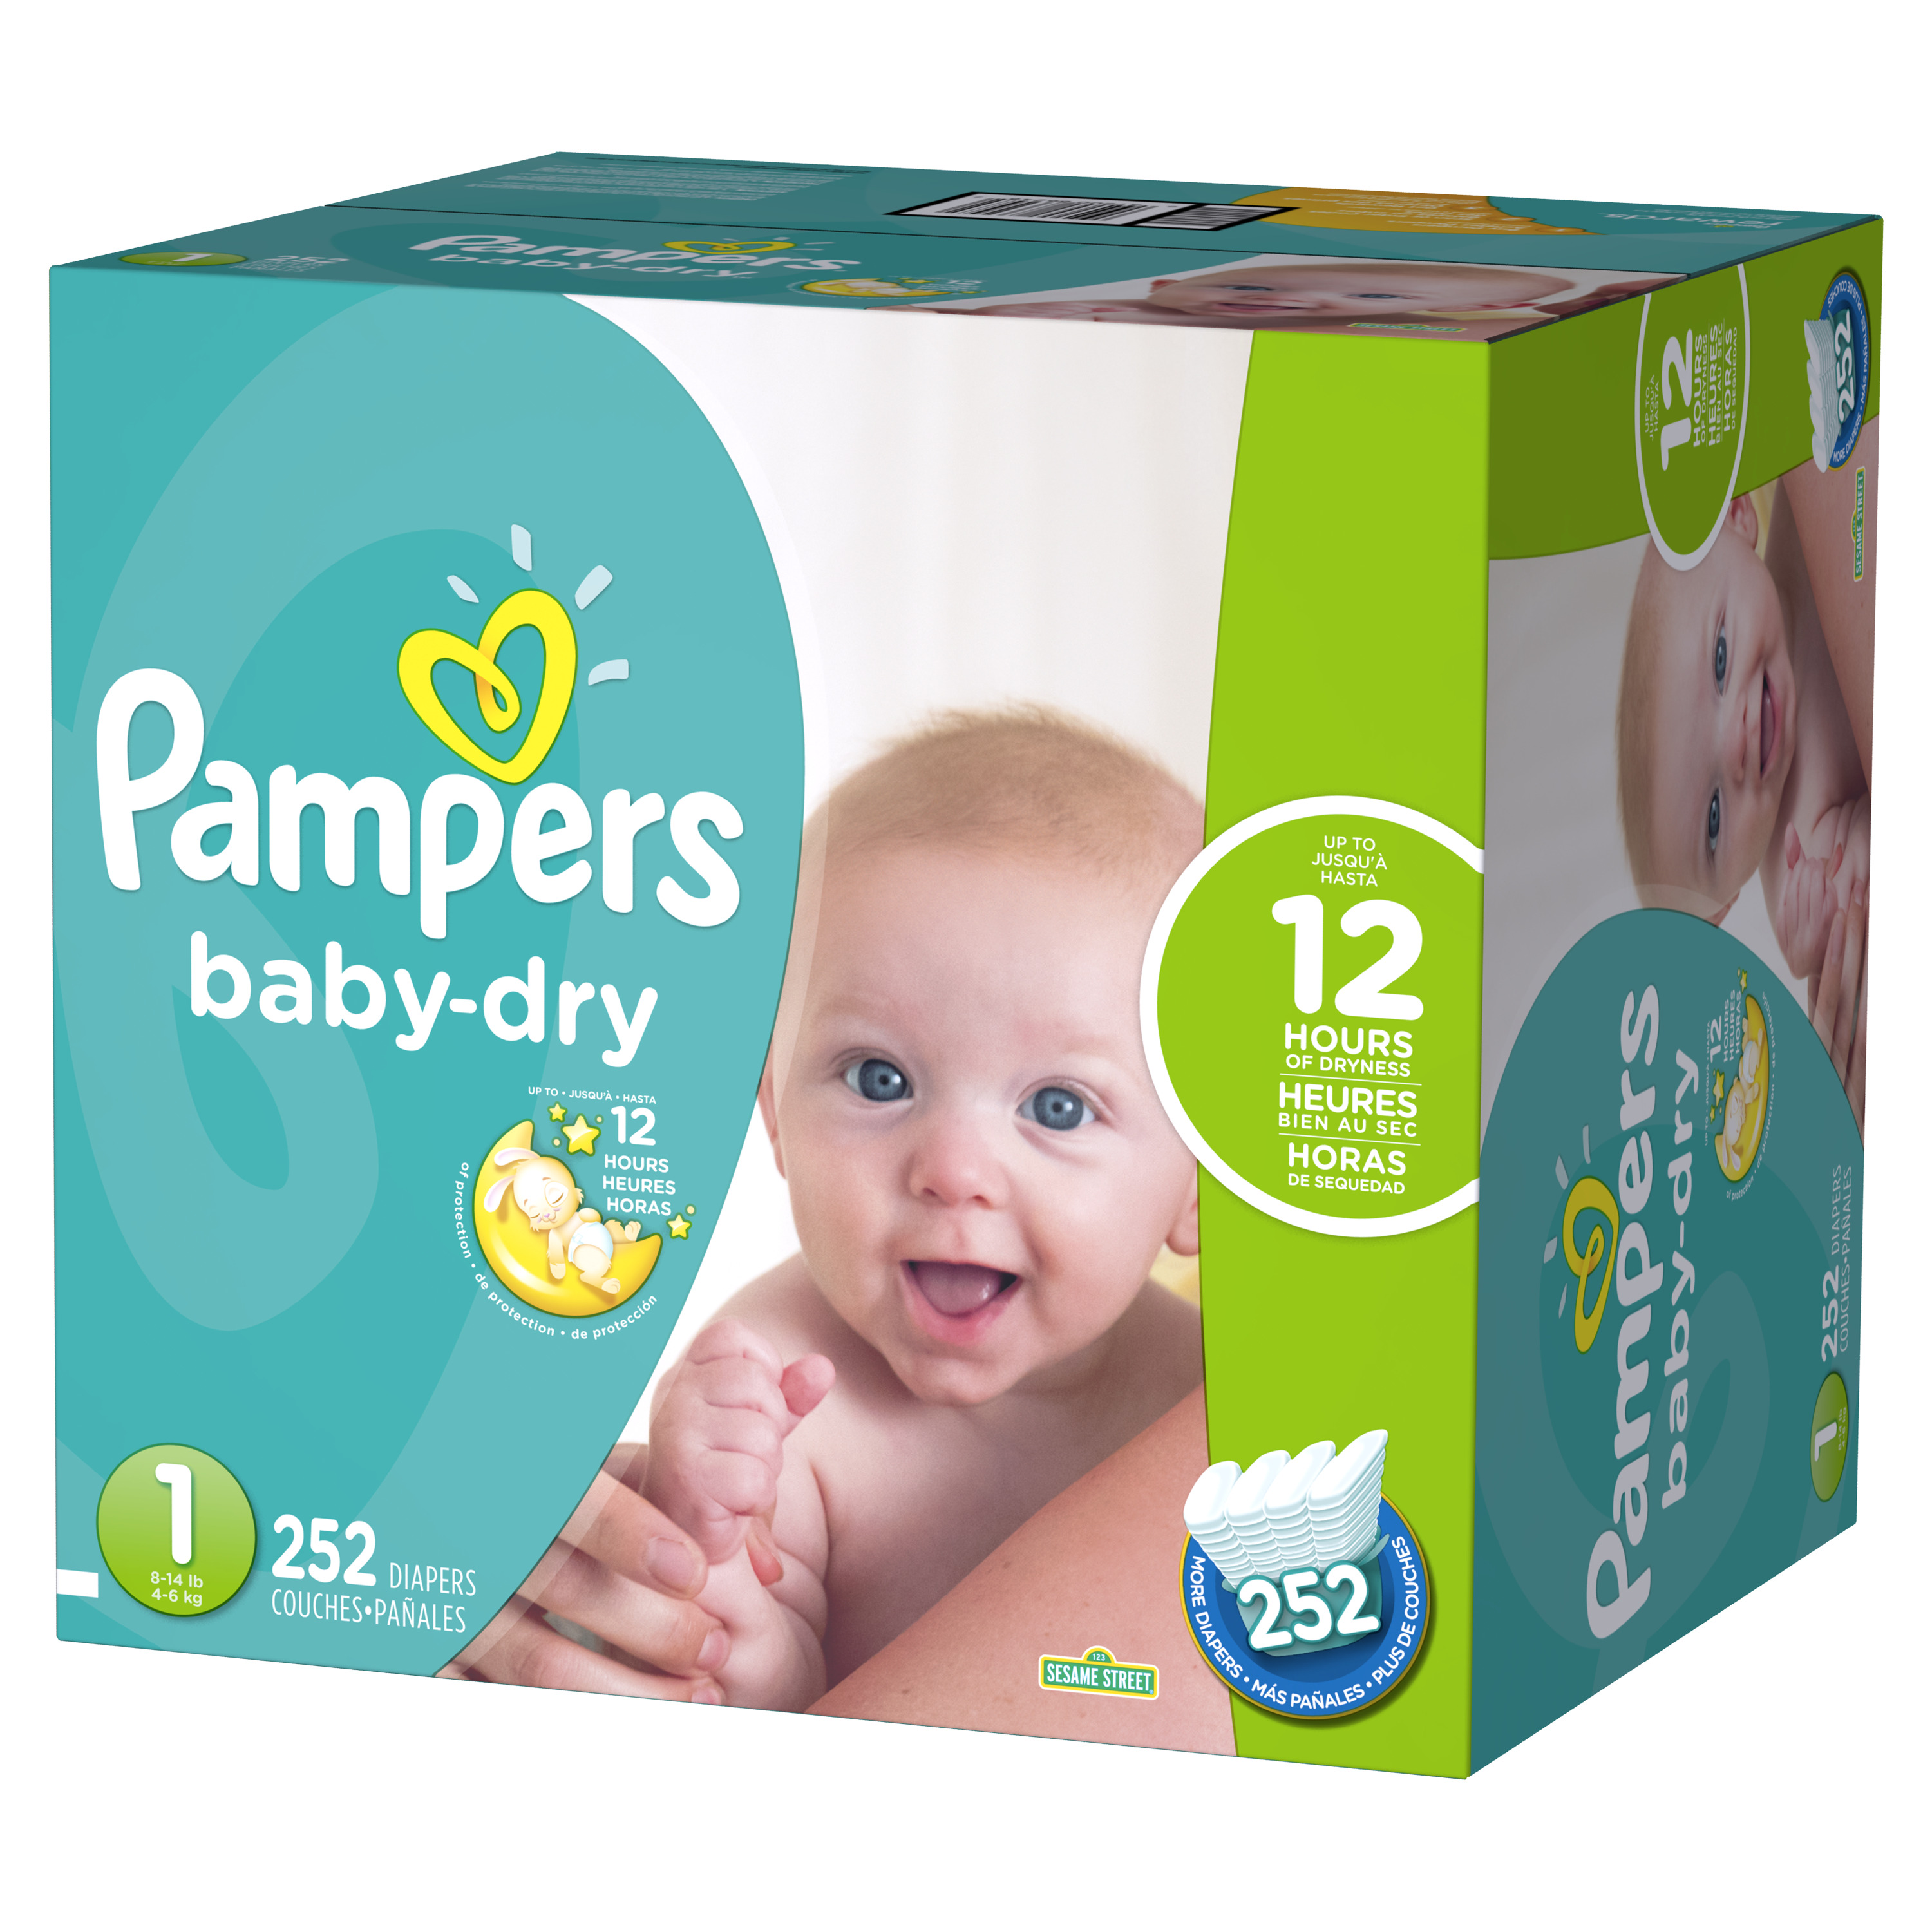 Pampers Baby Dry Size 1 Diapers (252 Count) - image 1 of 10